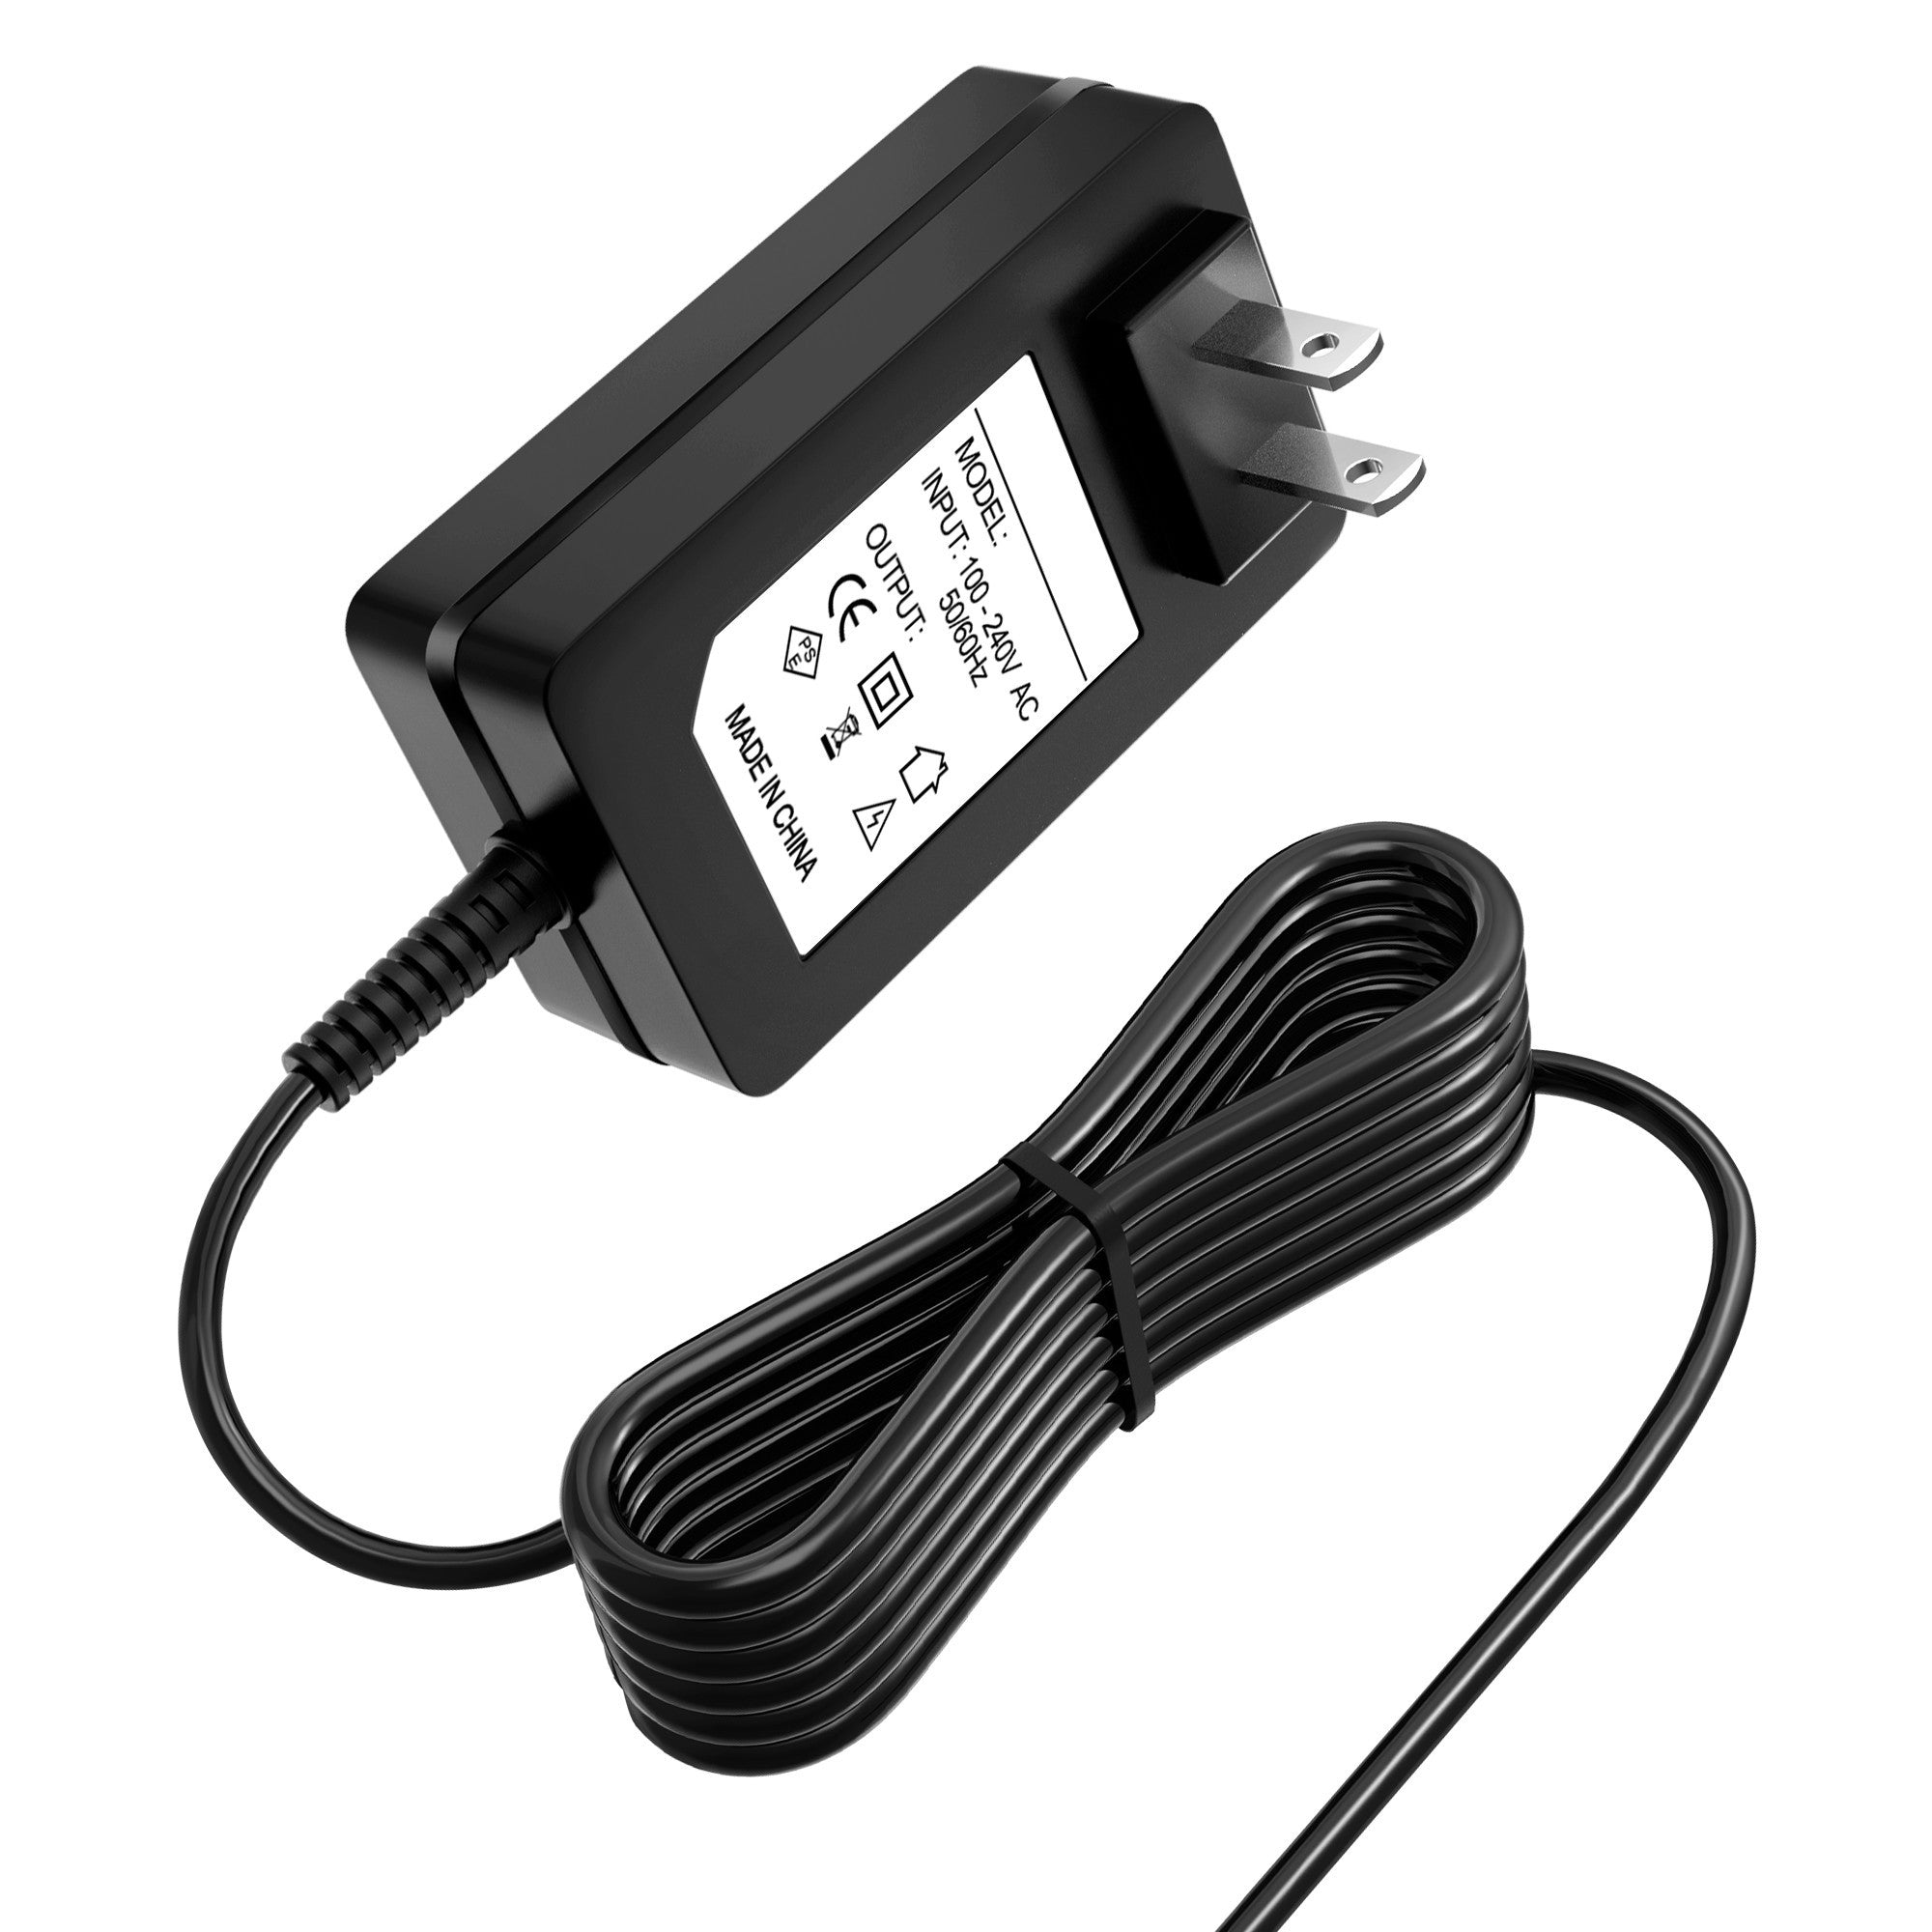 AbleGrid 16V DC Adapter Power Compatible with Proform 754 PF754030 stationary exercise bike Charger